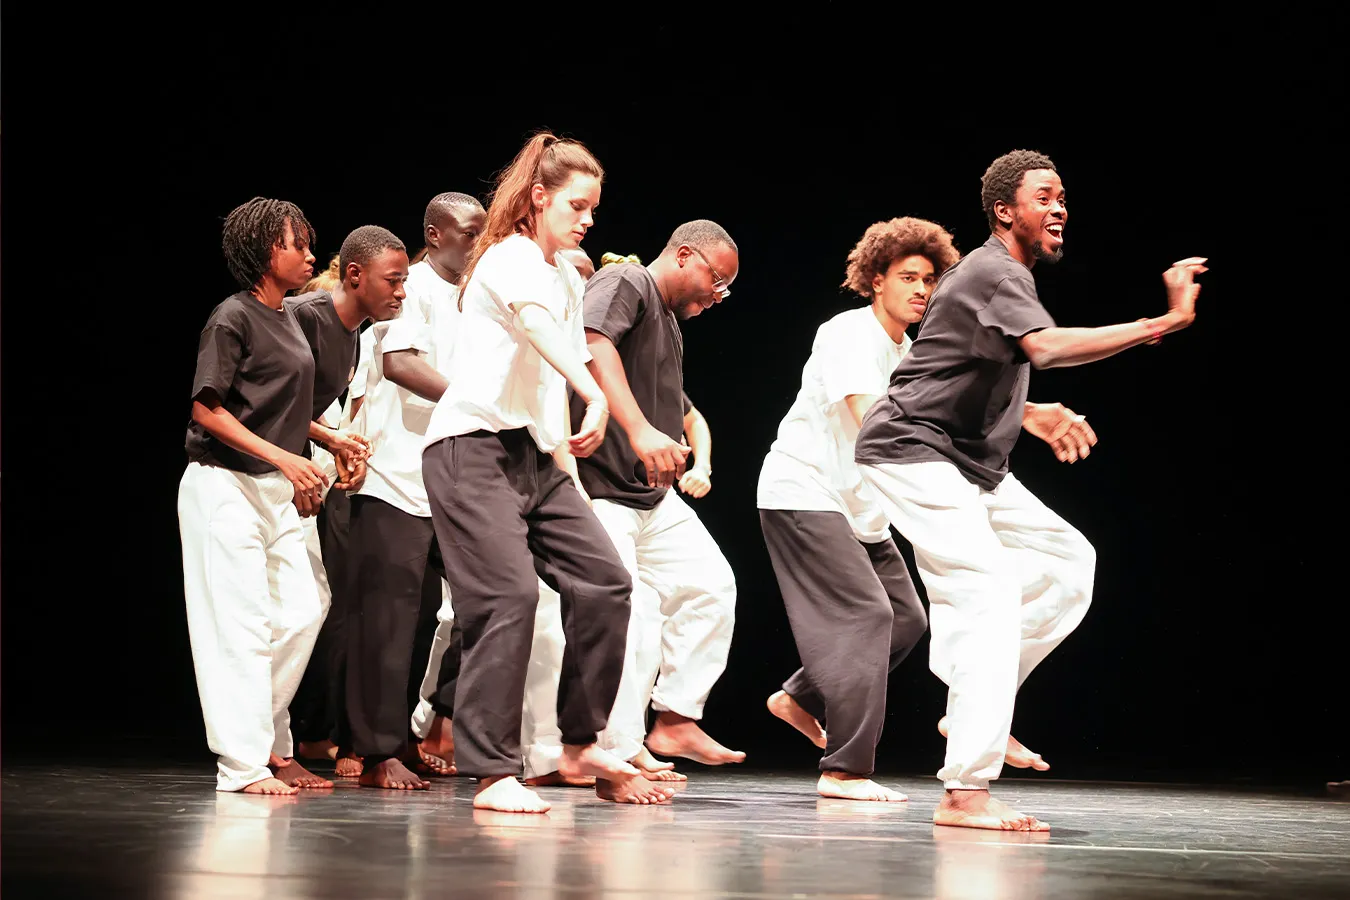 The photo shows a group of young people in a dance performance. They’re wearing black and white clothing and are moving.